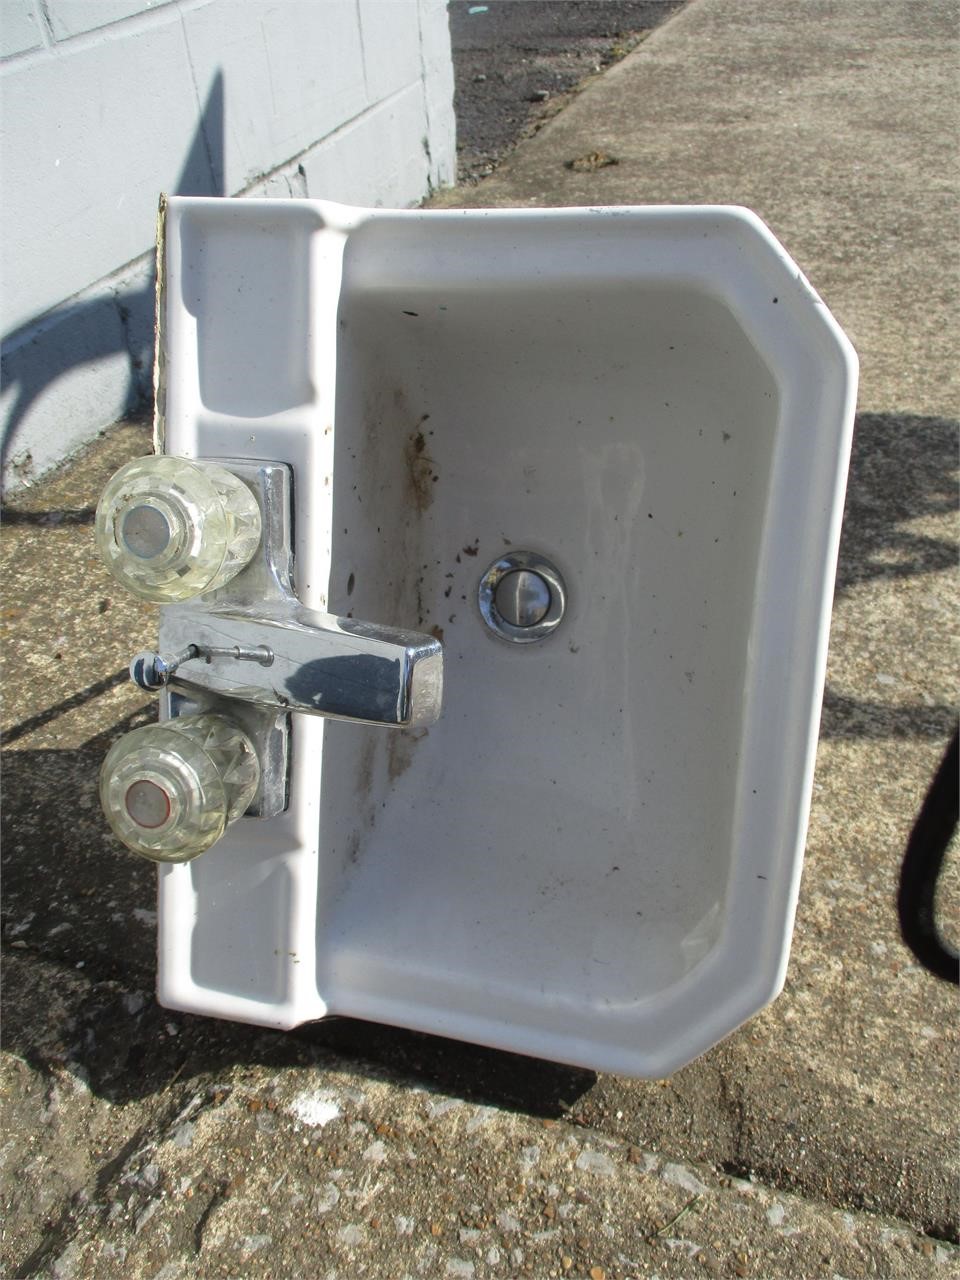 15x11 Ceramic Sink with Faucet